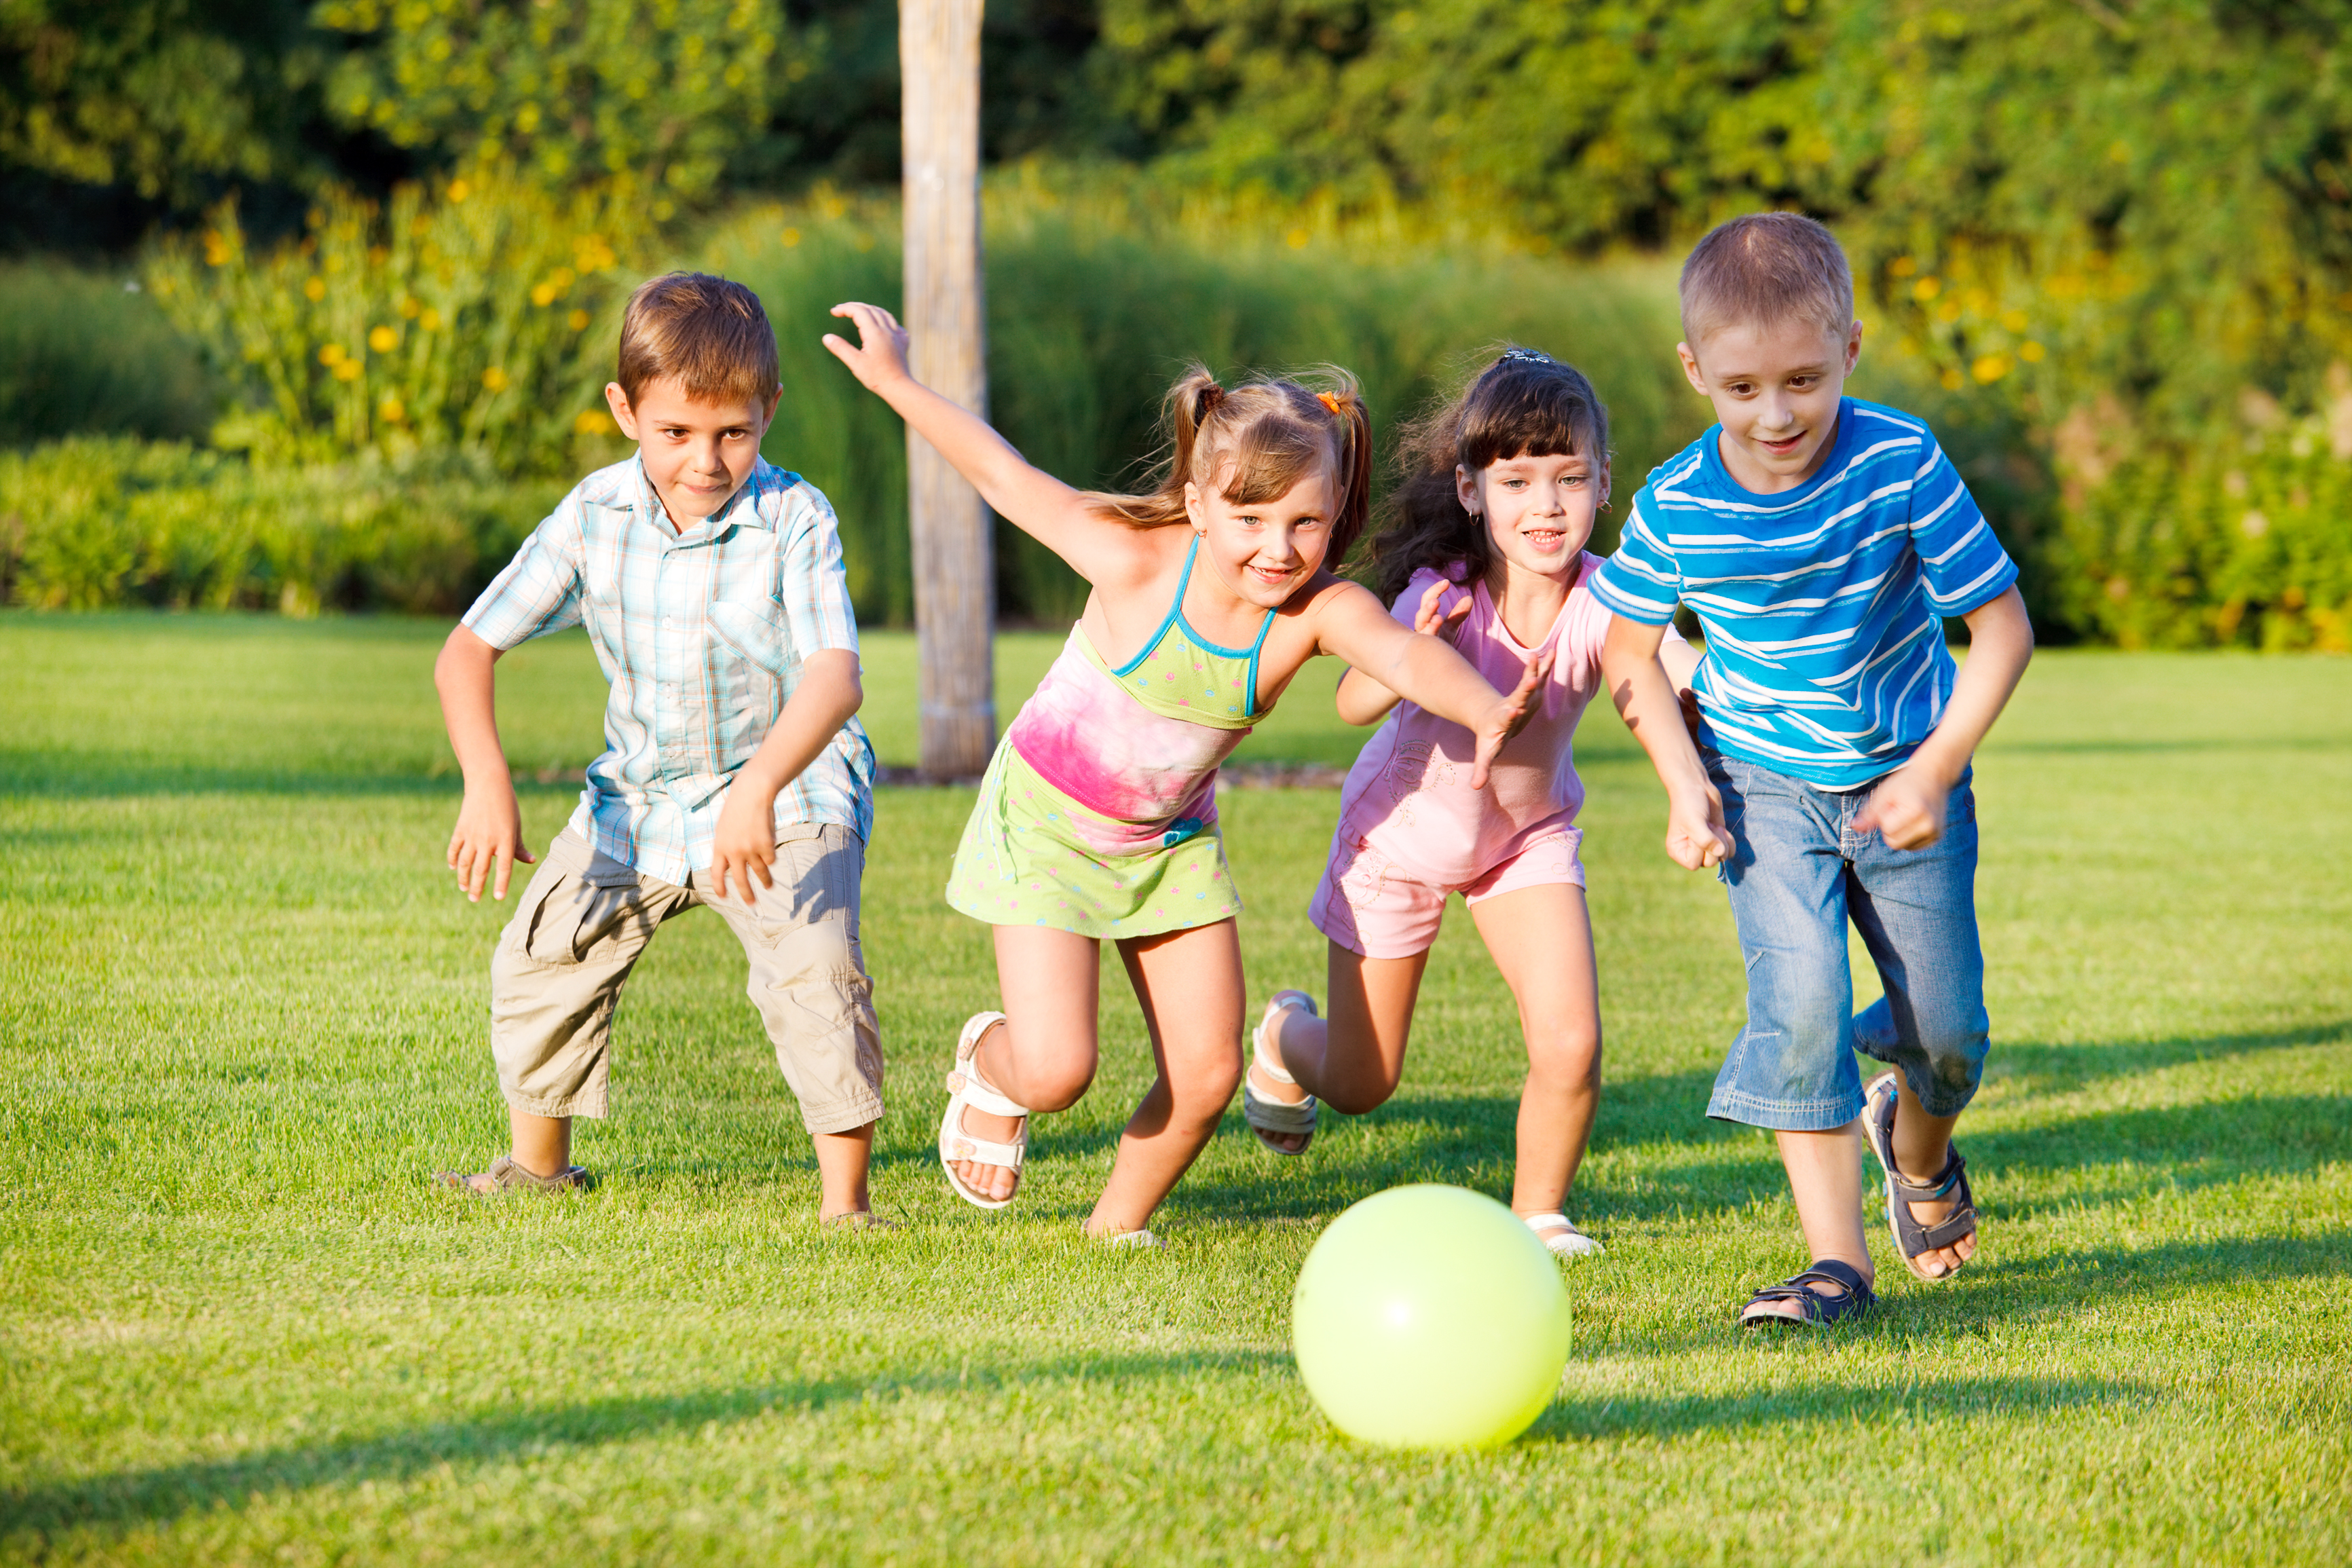 Cut Back on Screen Time: 6 Benefits of Outdoor Play